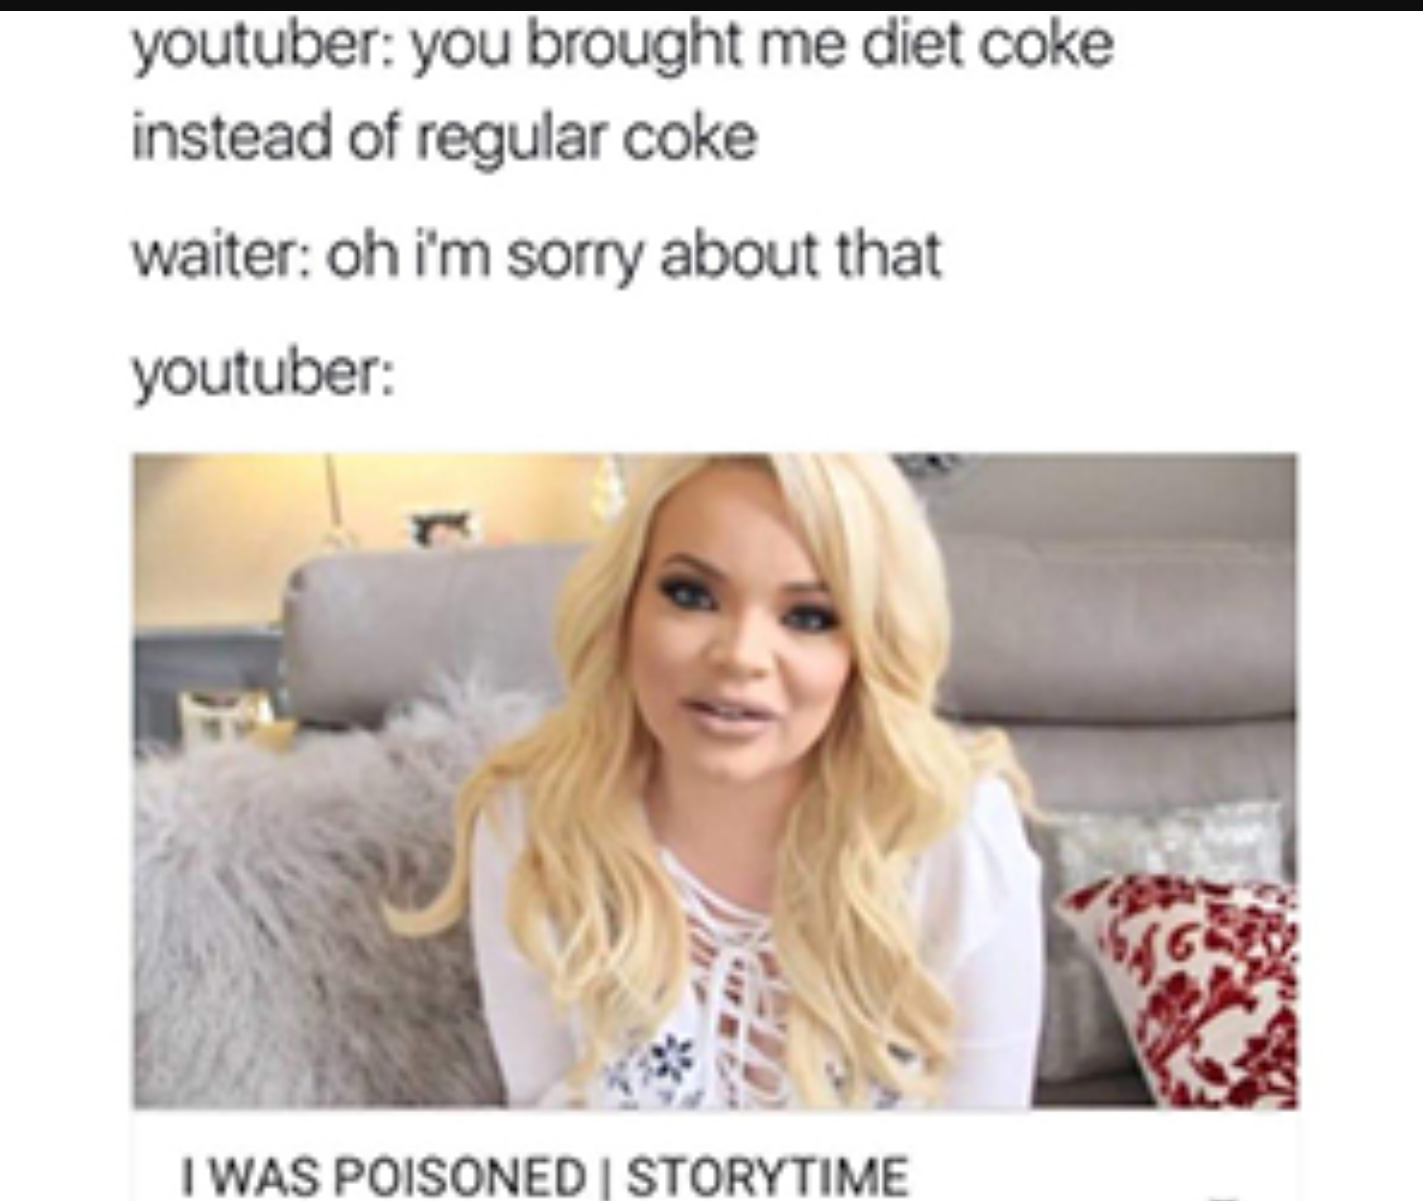 meme of youtuber claiming to be poisoned after getting diet coke instead of regular.